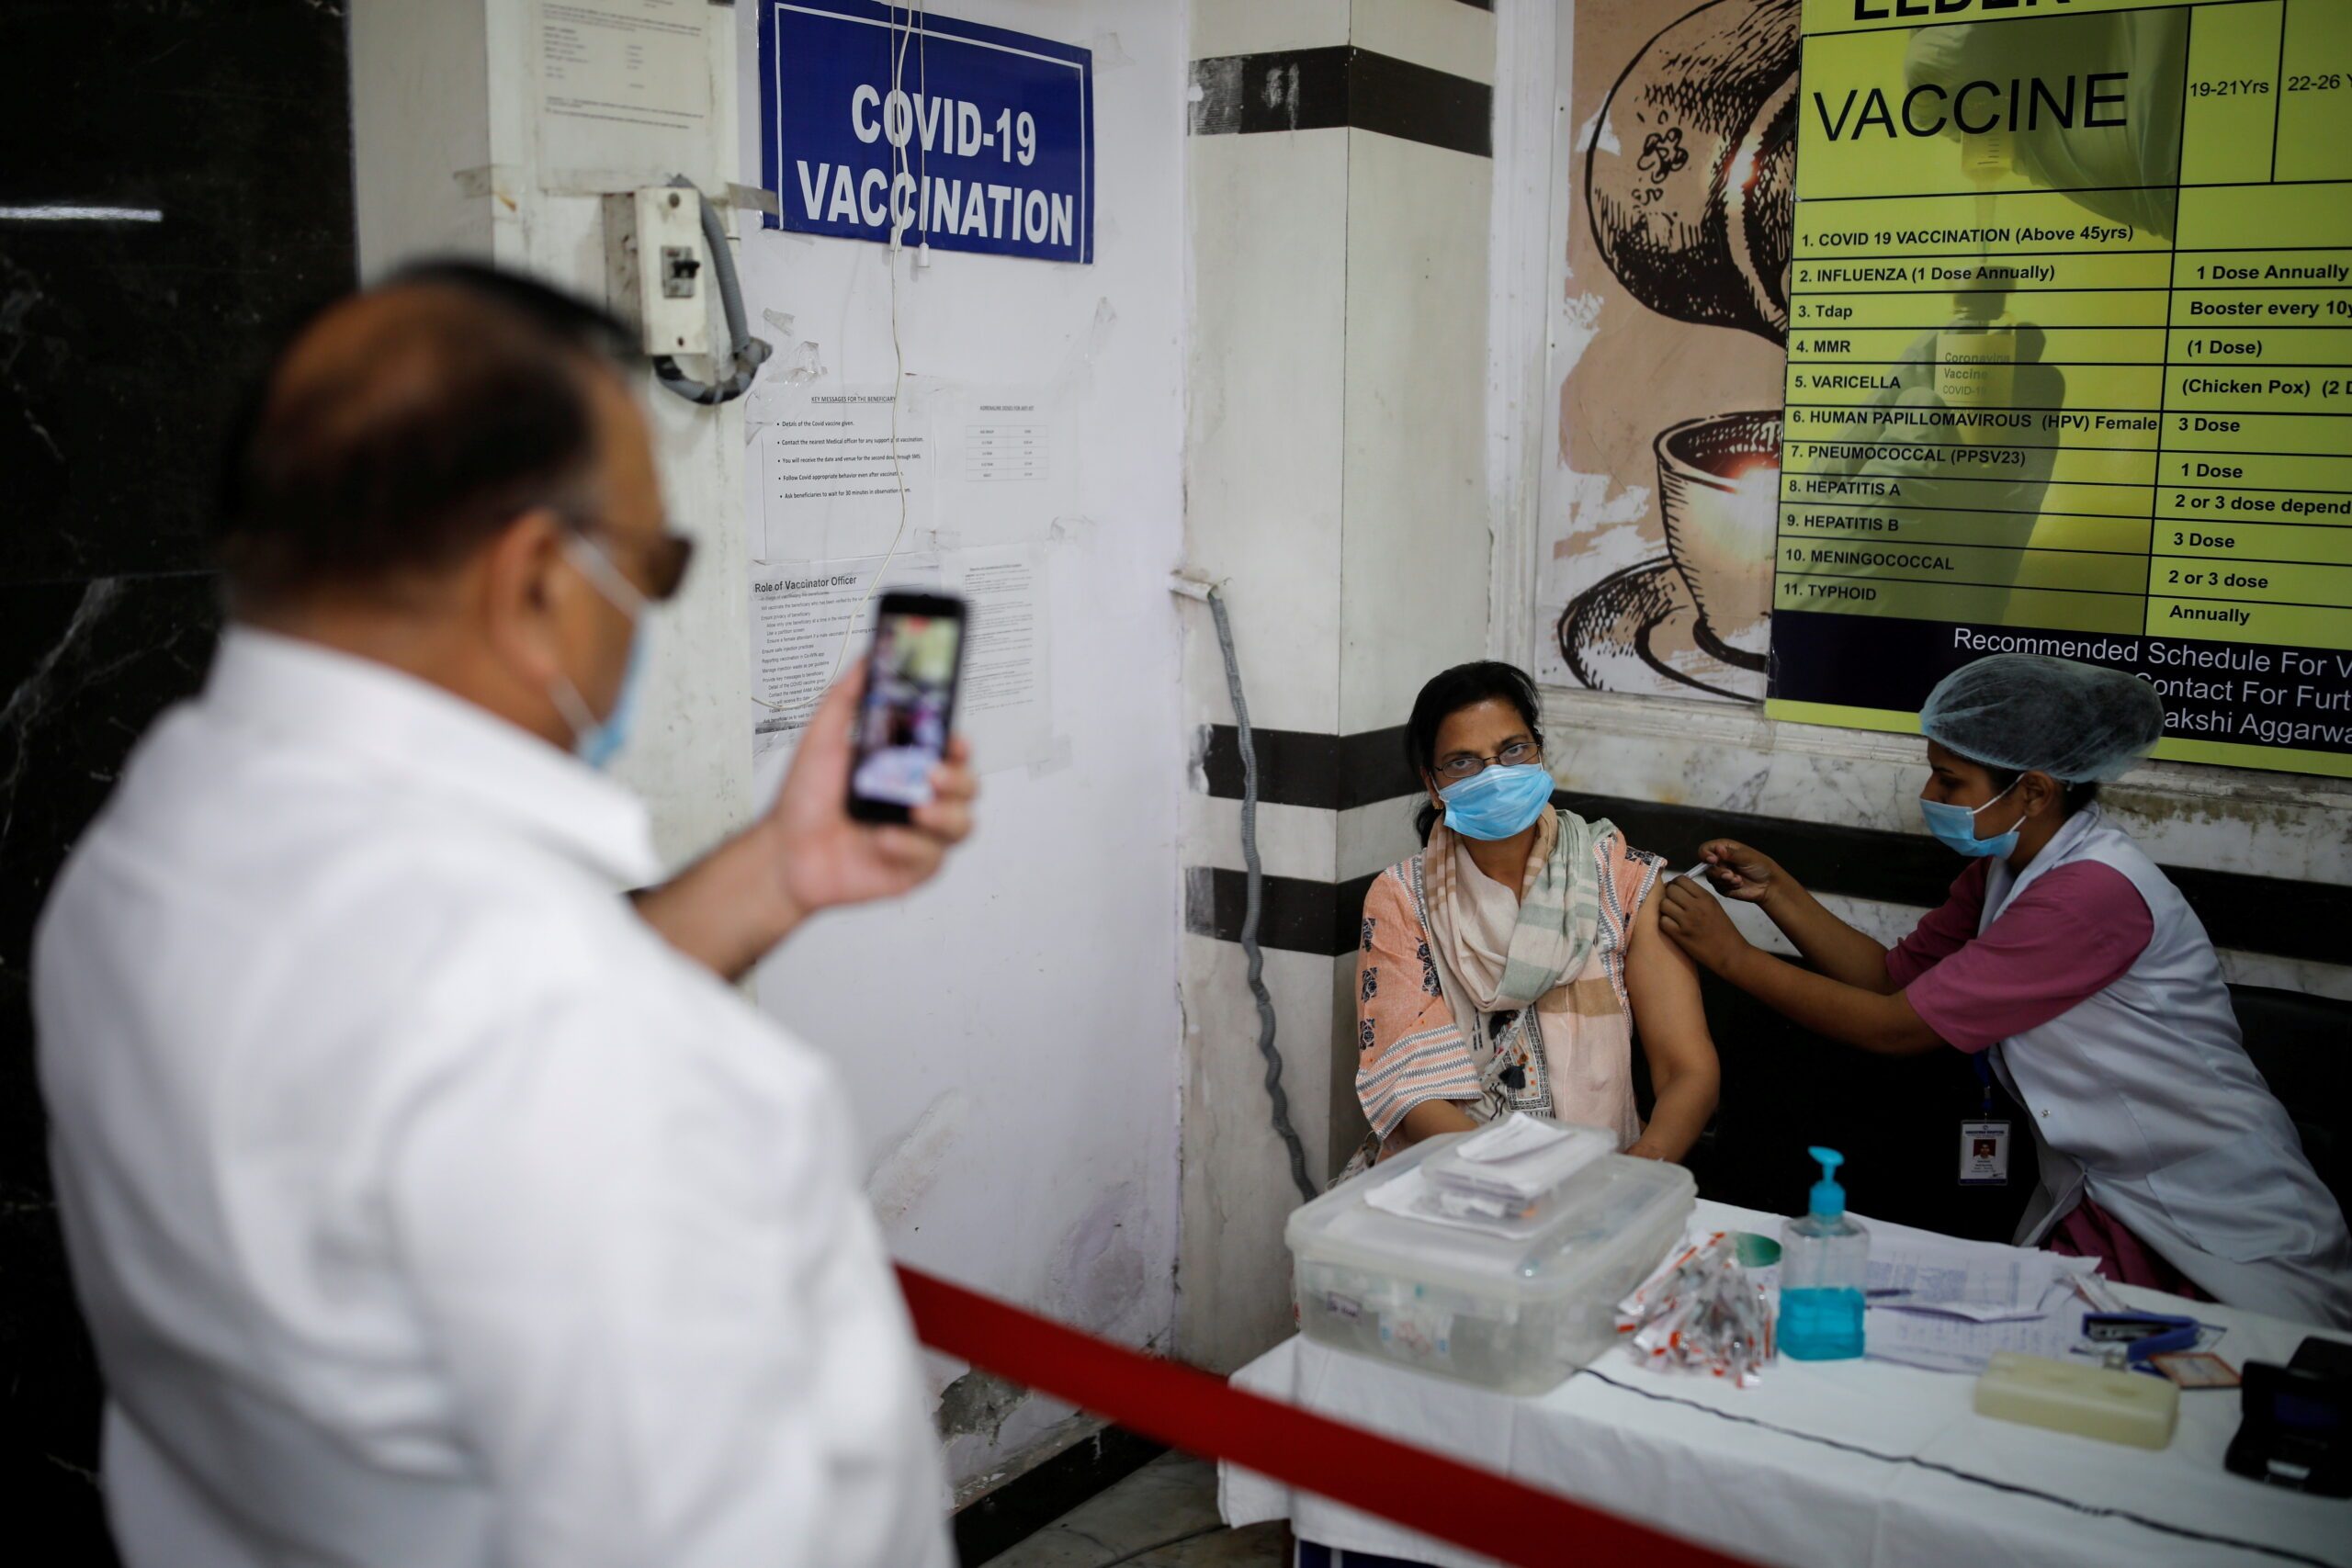 India’s Omicron cases mild, vaccine boosters not a priority – government